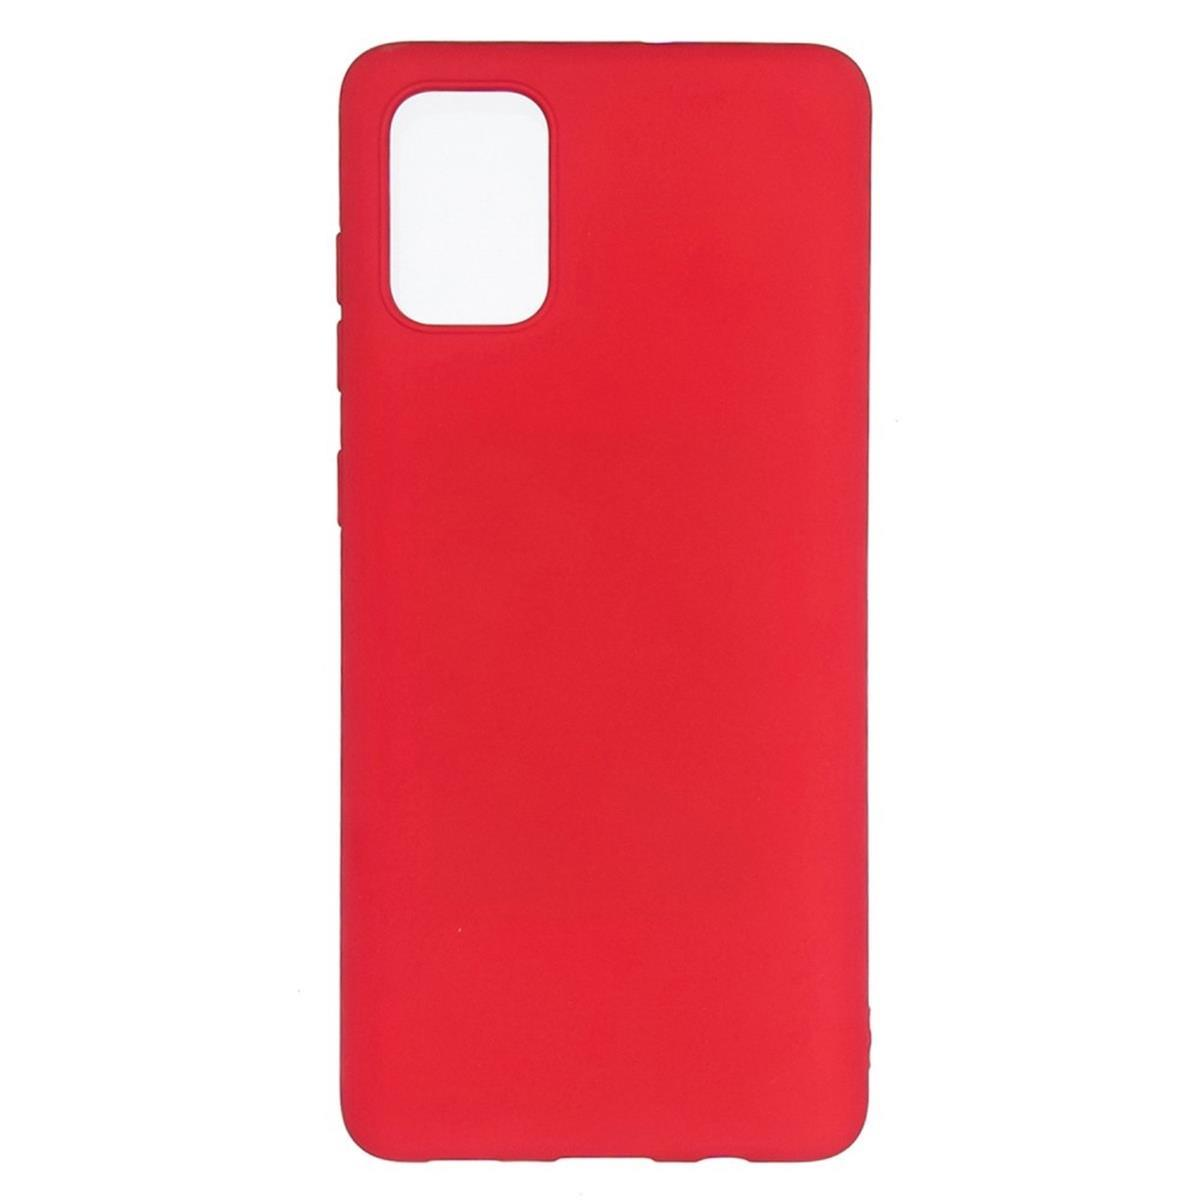 COVERKINGZ Note10 Samsung, Lite, Silikon, Handycase Rot aus Backcover, Galaxy